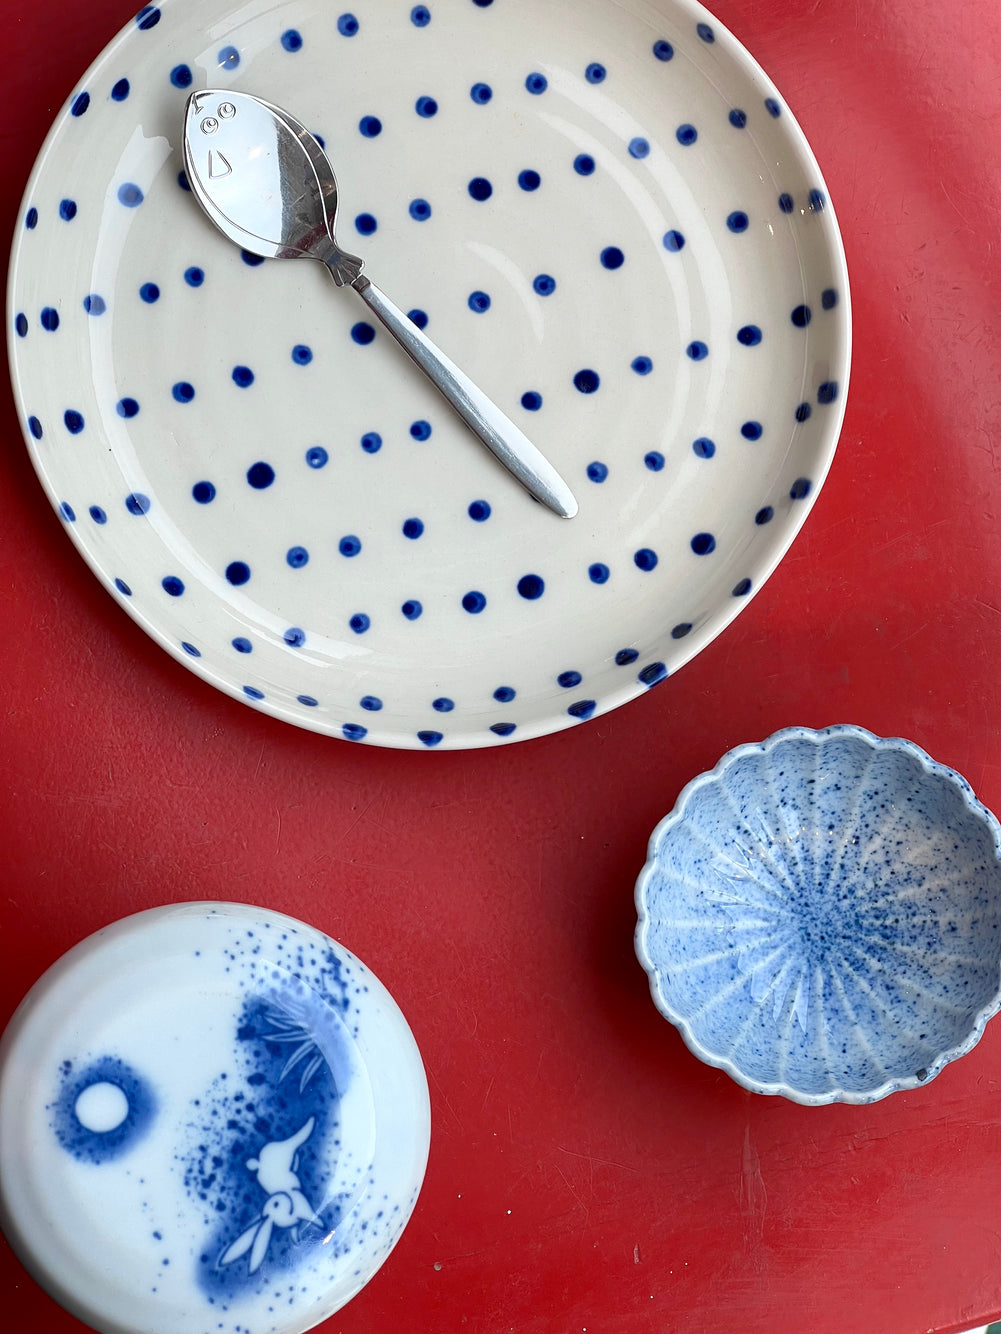 The plate with dots